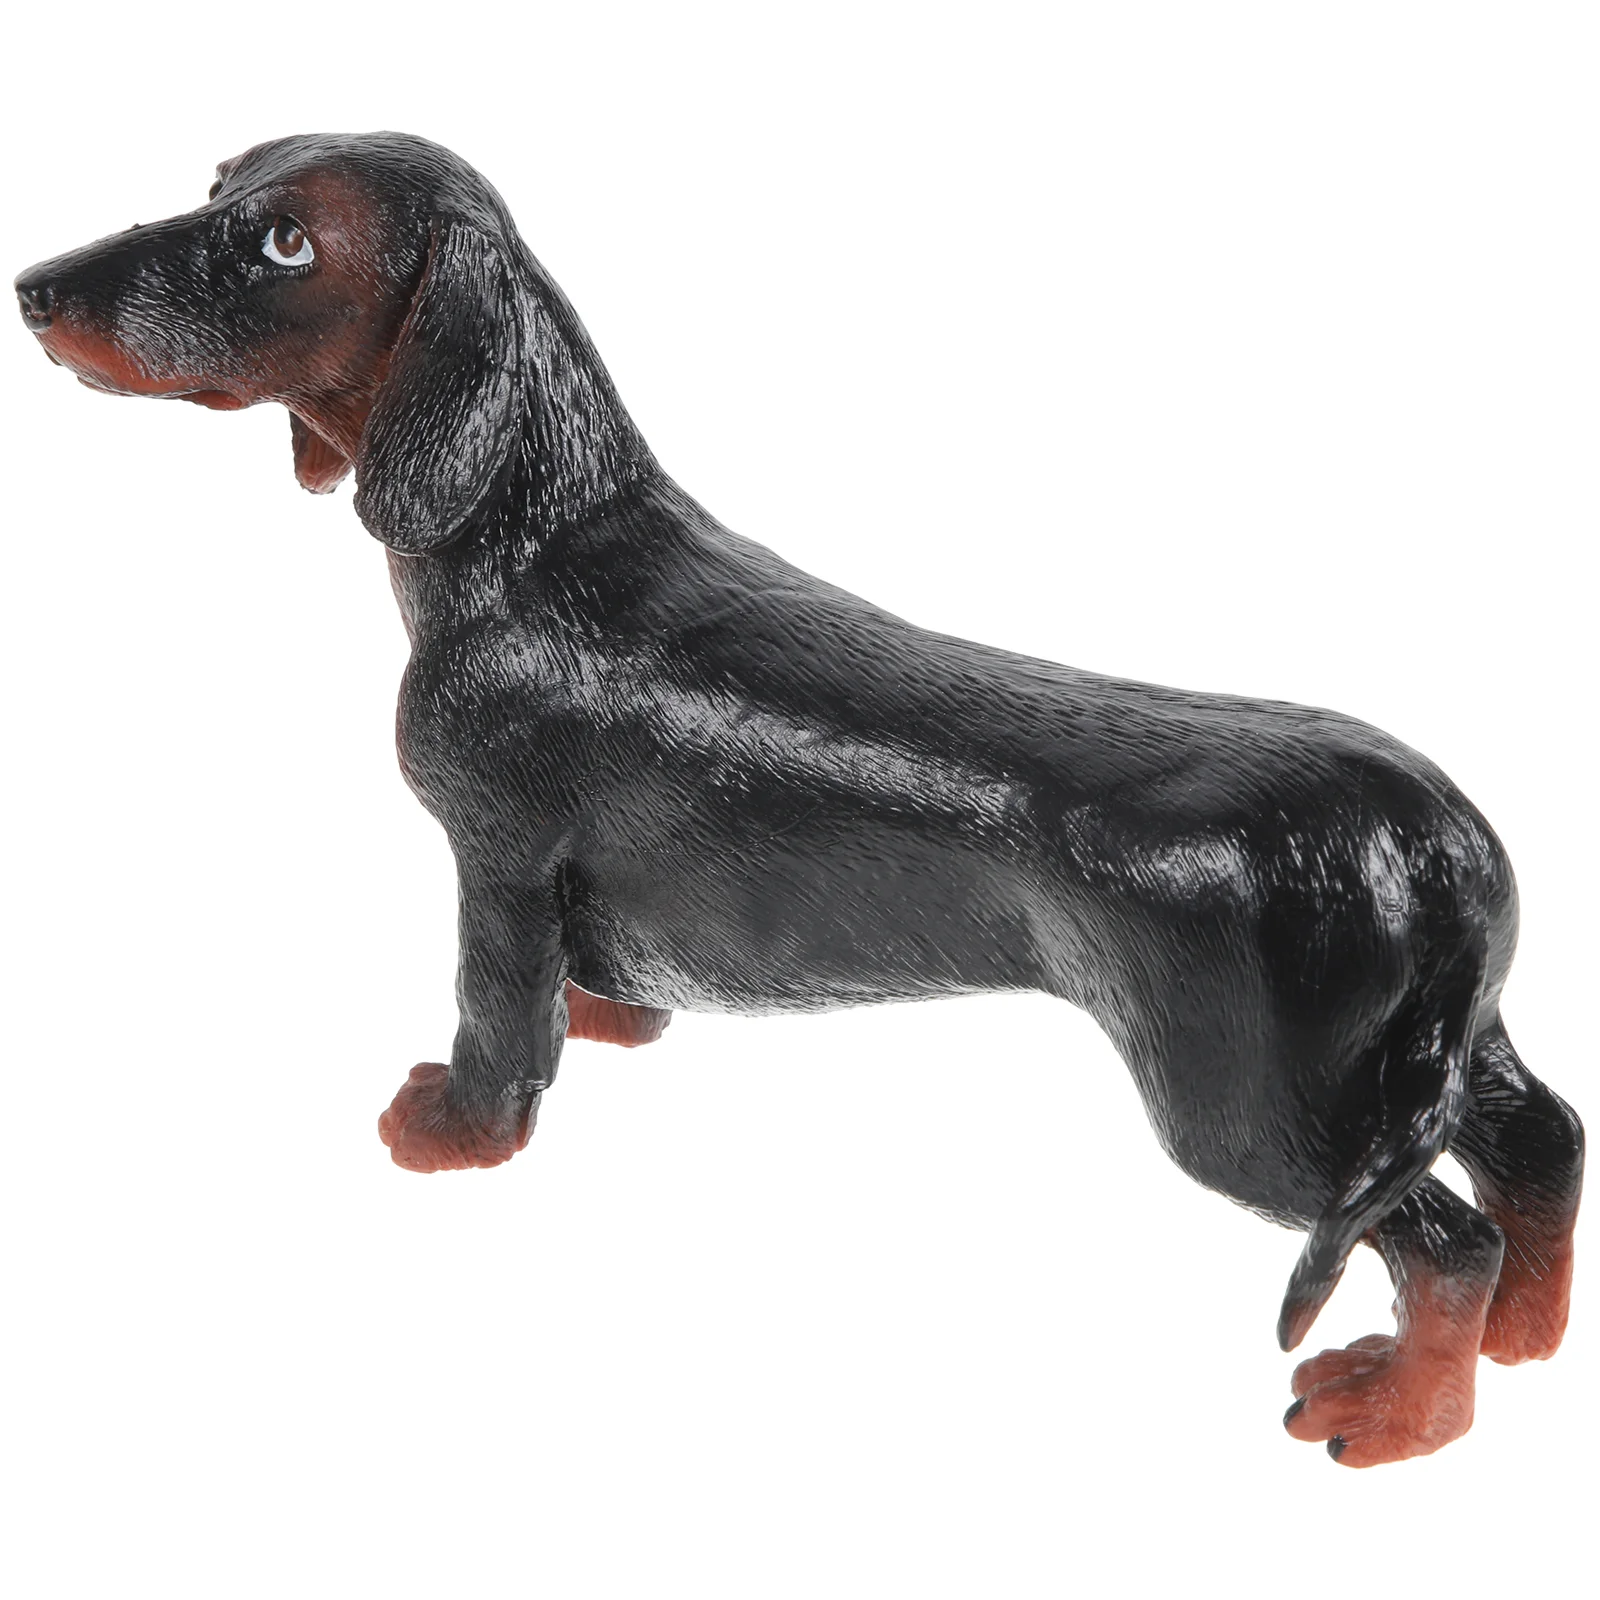 

Simulation Dachshund Animal Model Figures Toy Dog Sculpture Artificial Ornament Kids Toys Figurine Puppy for